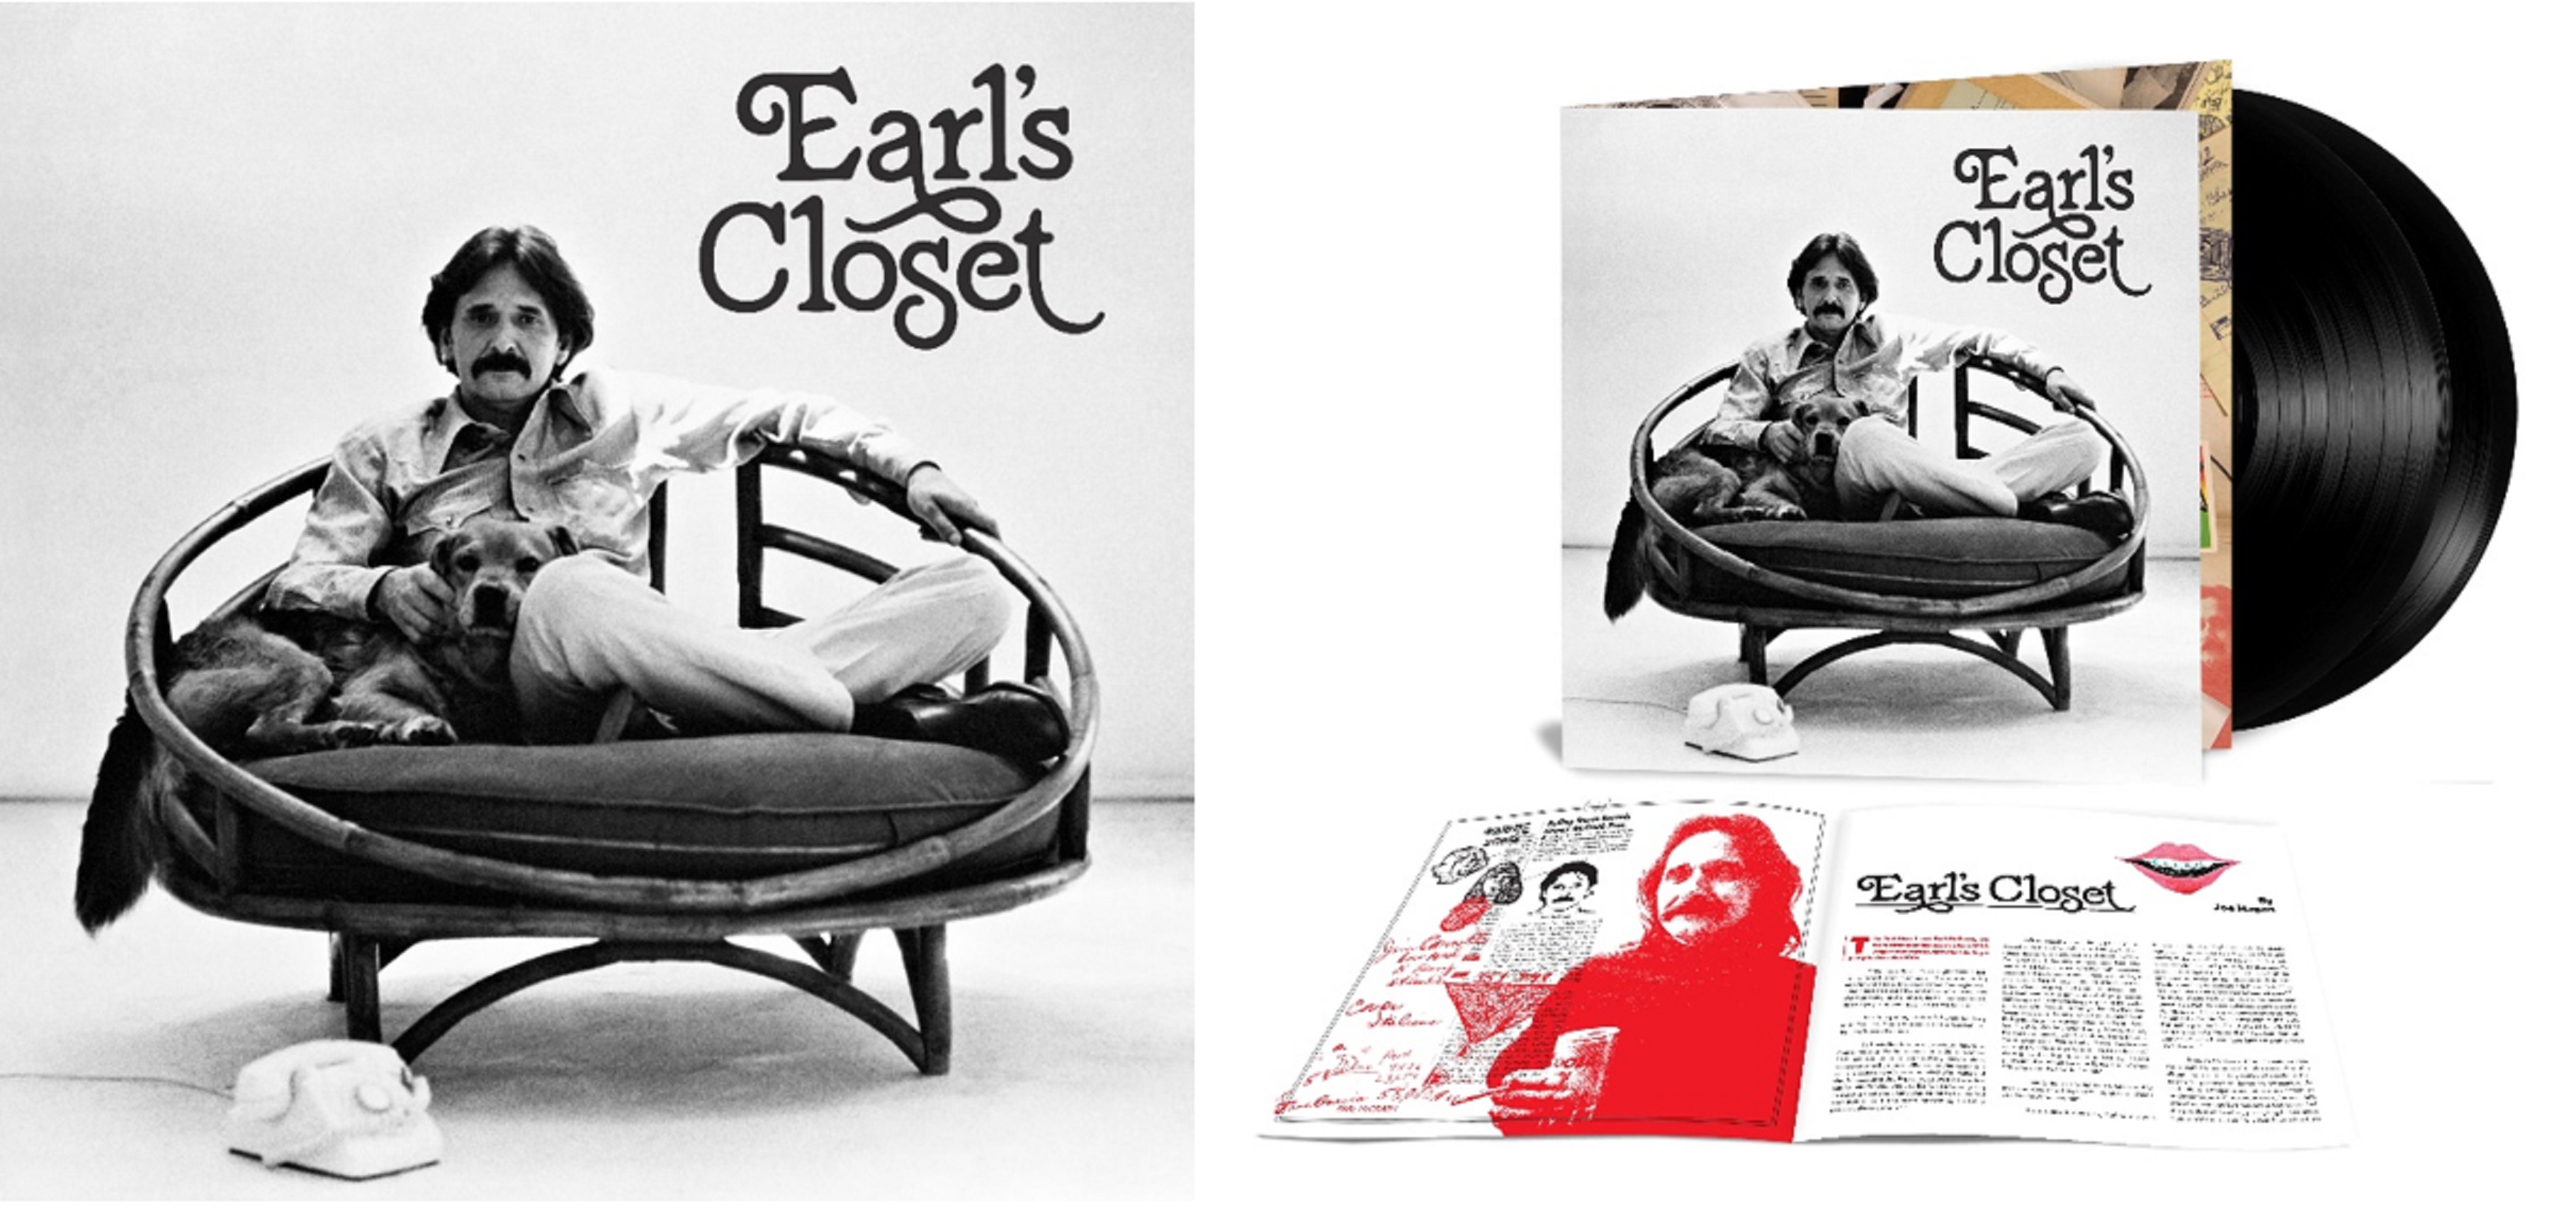 EARL’S CLOSET: THE LOST ARCHIVE OF EARL MCGRATH, 1970-1980